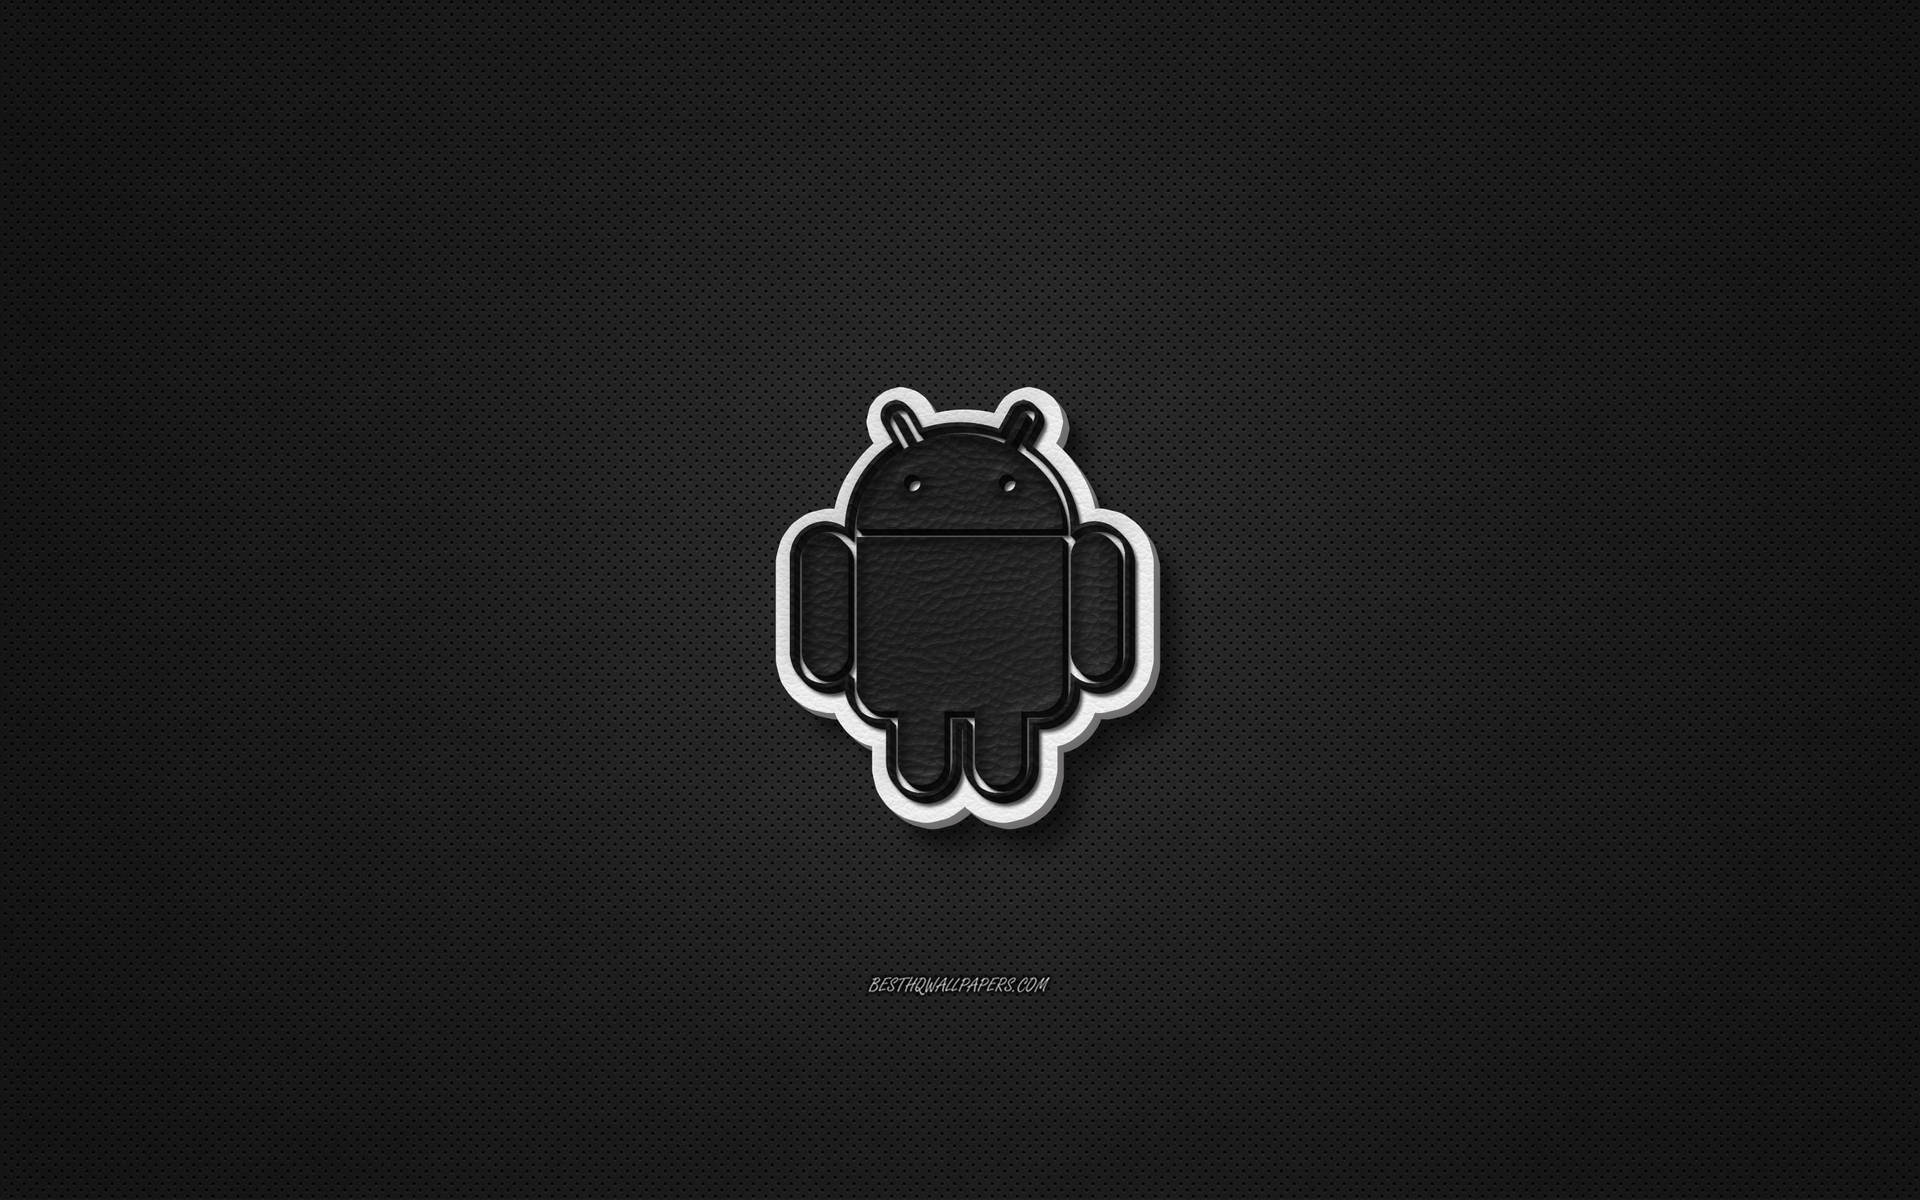 Android Leather Logo Desktop